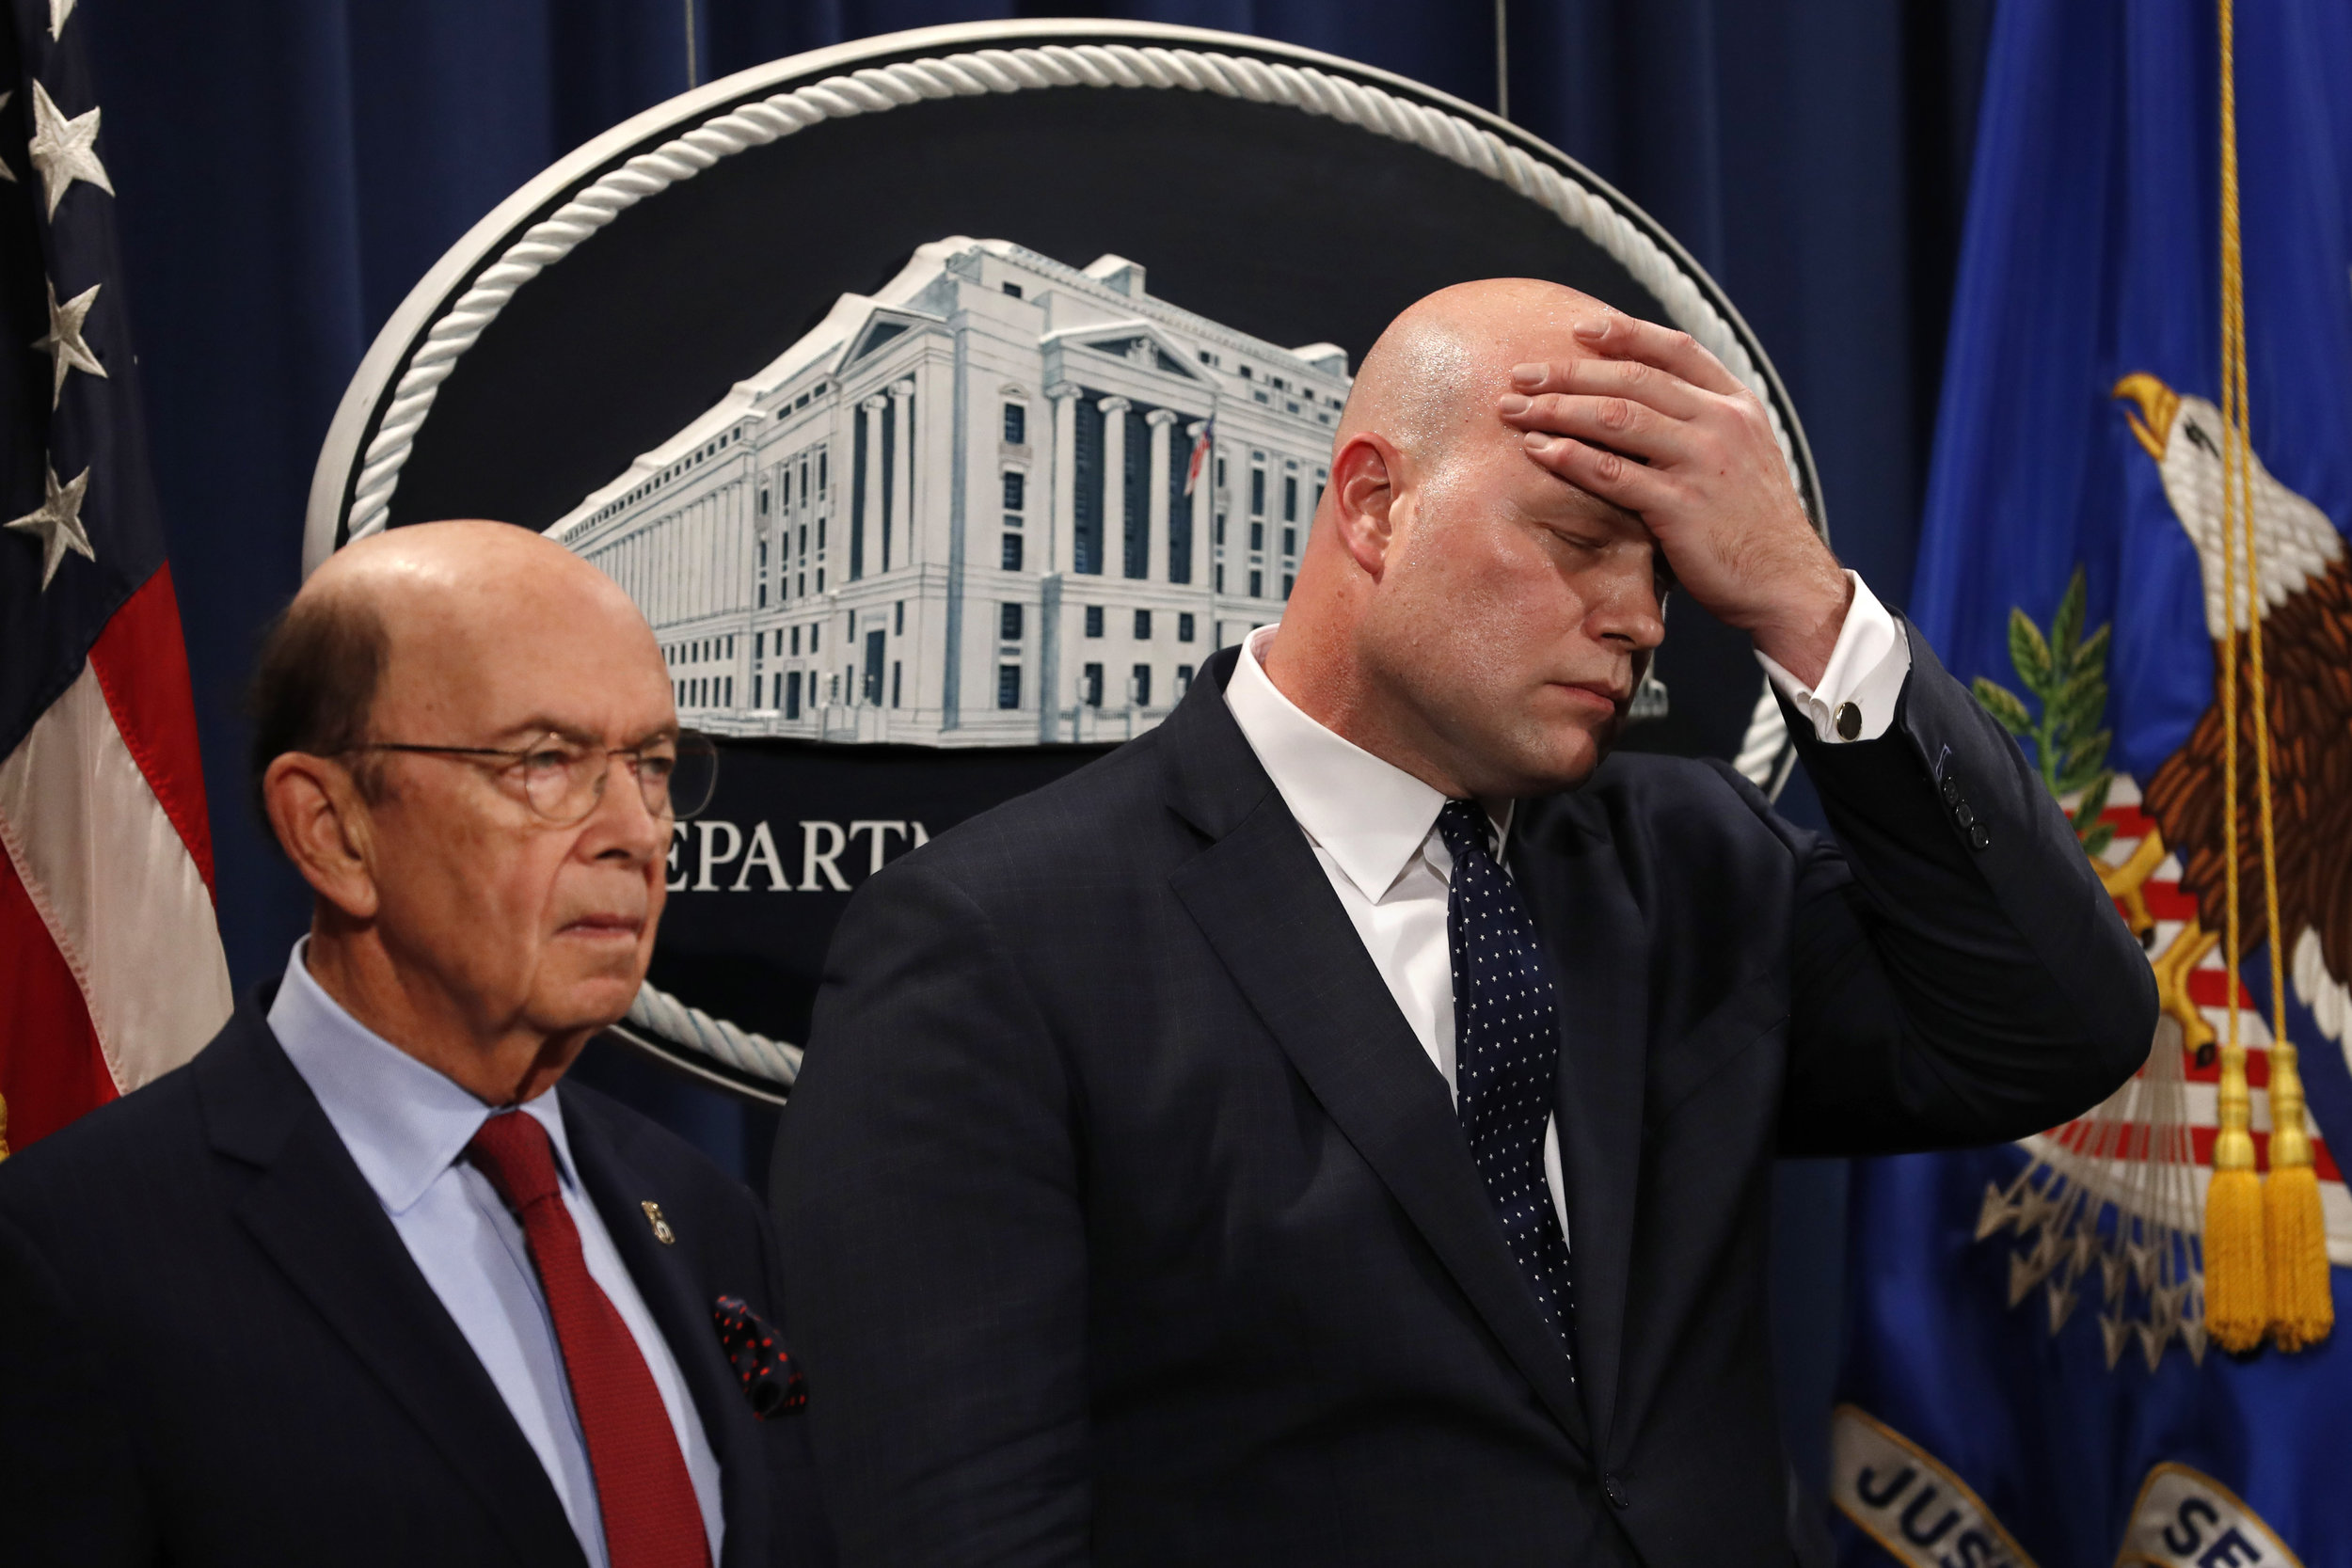 Acting Attorney General Matt Whitaker (right) wipes his brow Monday after announcing an indictment on violations including bank and wire fraud of Chinese telecommunications companies including Huawei at the Justice Department in Washington. At left is Commerce Secretary Wilbur Ross. AP Photo/Jacquelyn Martin.